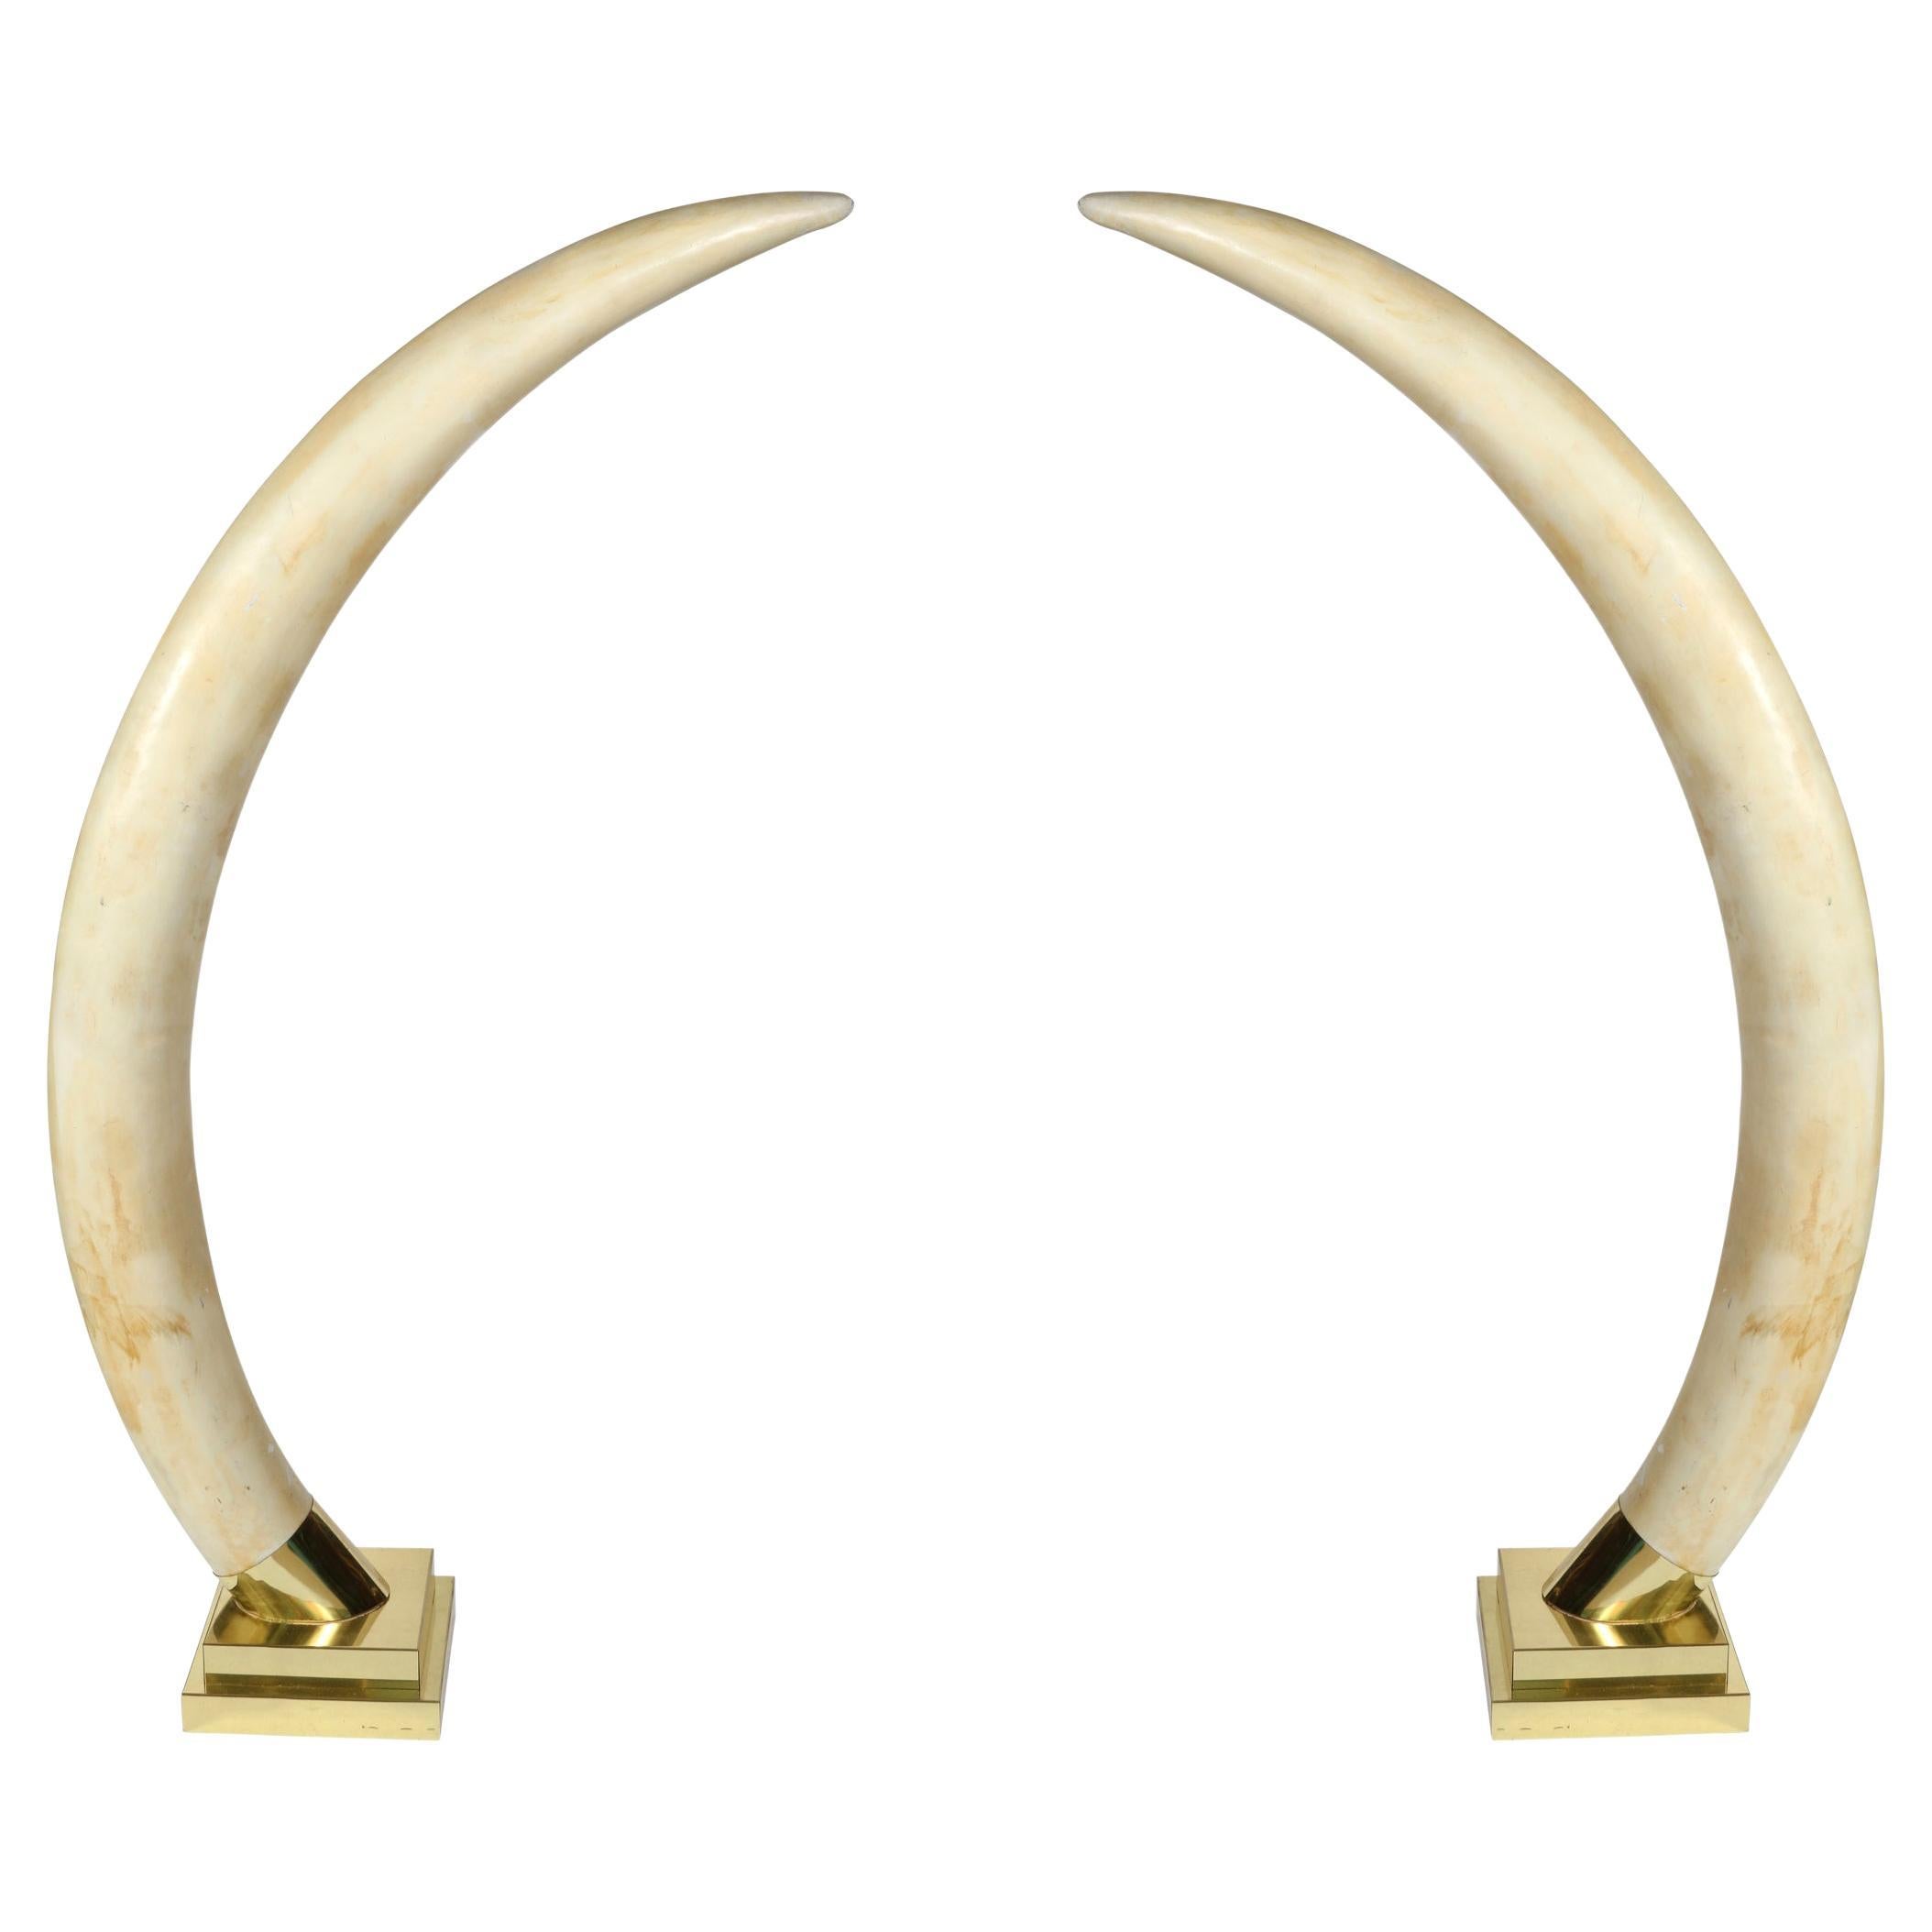 Pair of Life Size Faux Composition Elephant Tusks